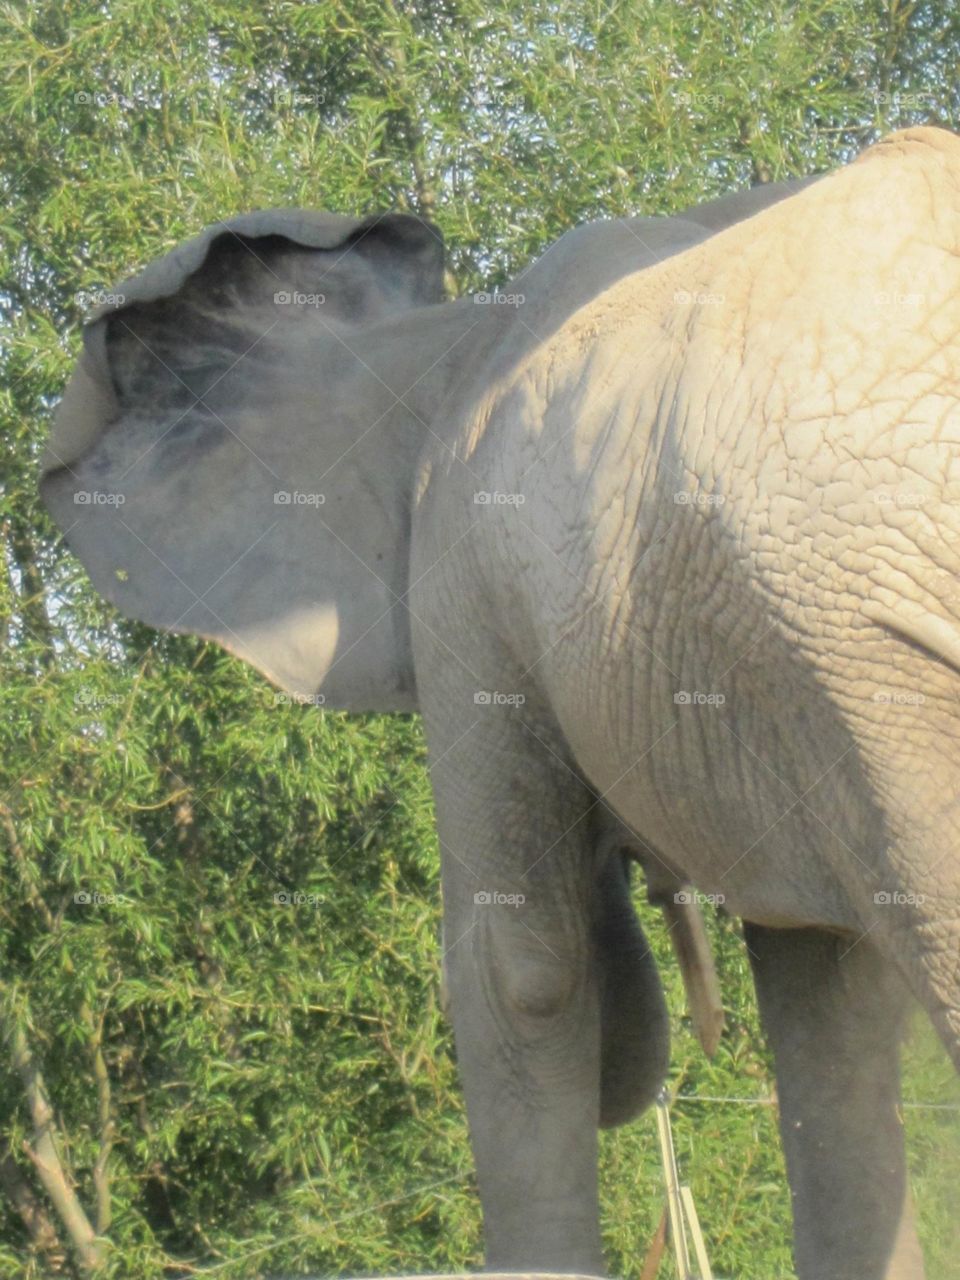 Back side view of an elephant with an open ear